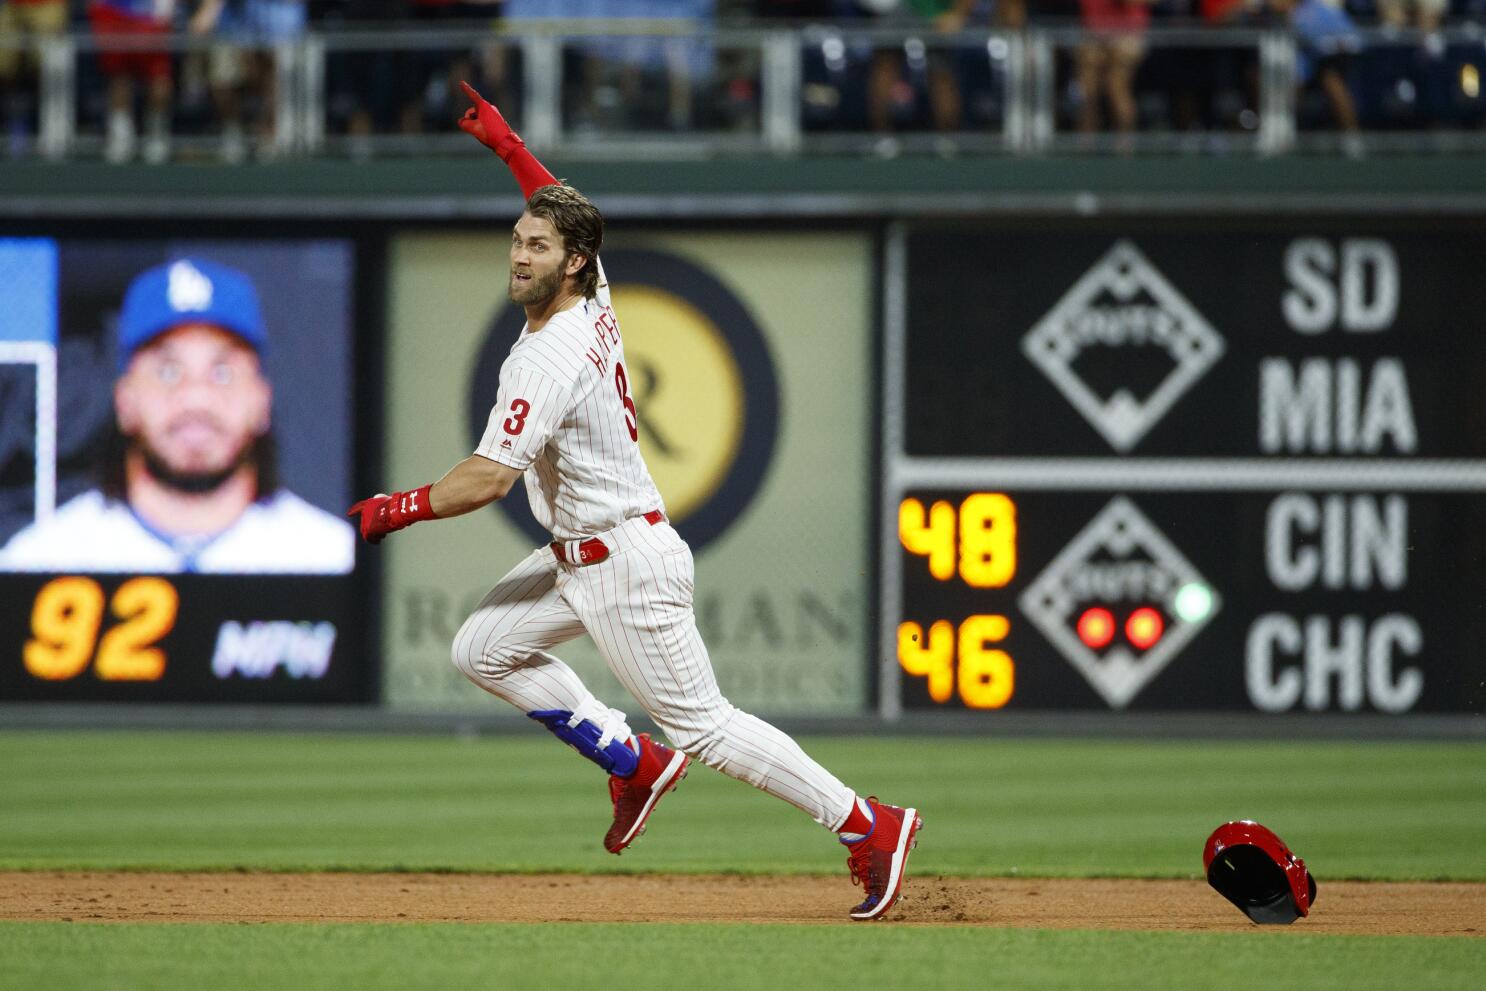 Bryce Harper strikes out twice as Phillies win 2019 debut